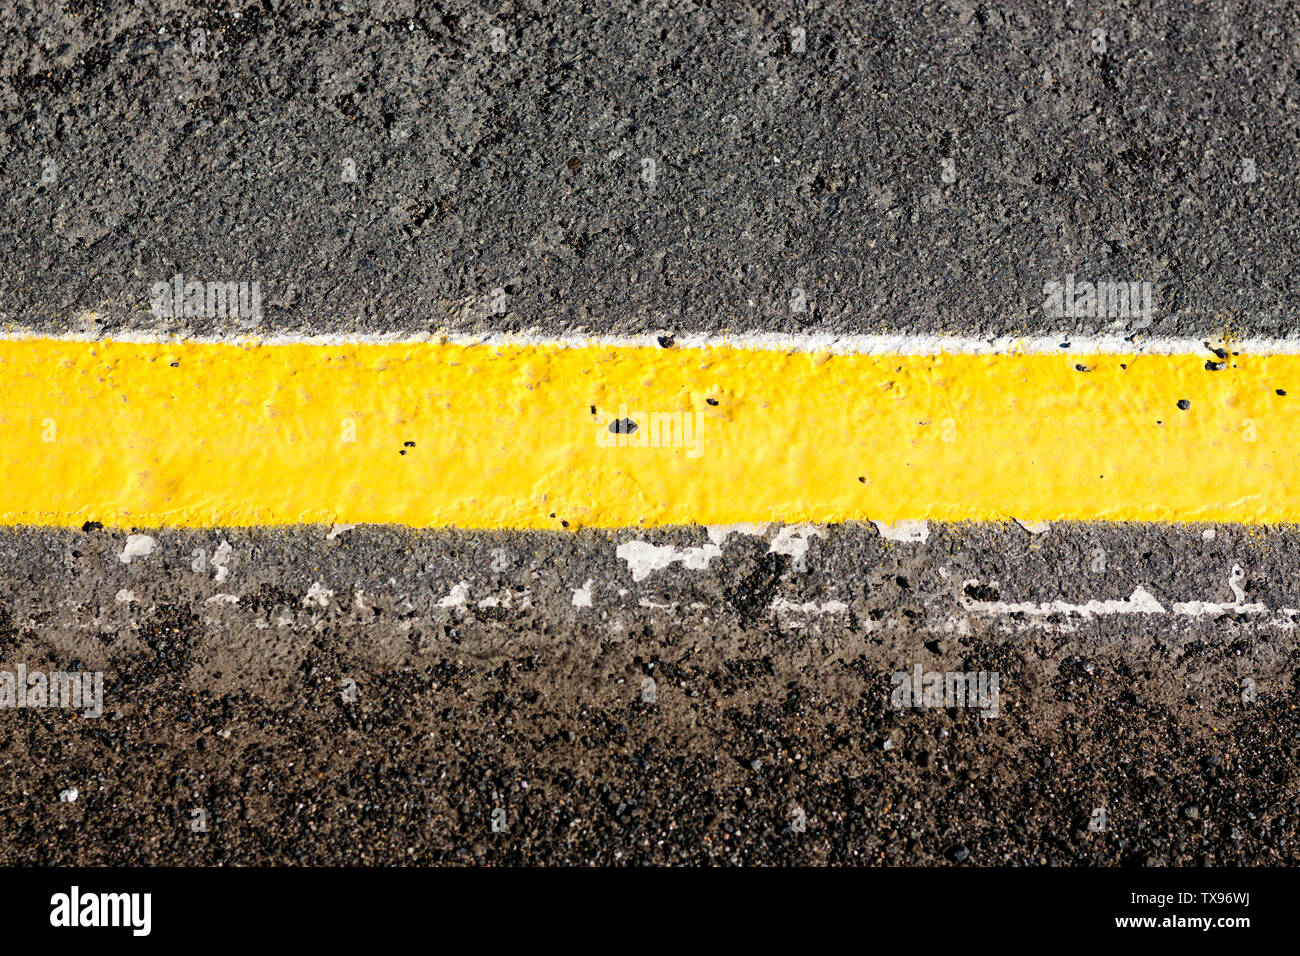 The yellow line is drawn on the asphalt gray tint. The line separates the two parts of the pavement. Stock Photo